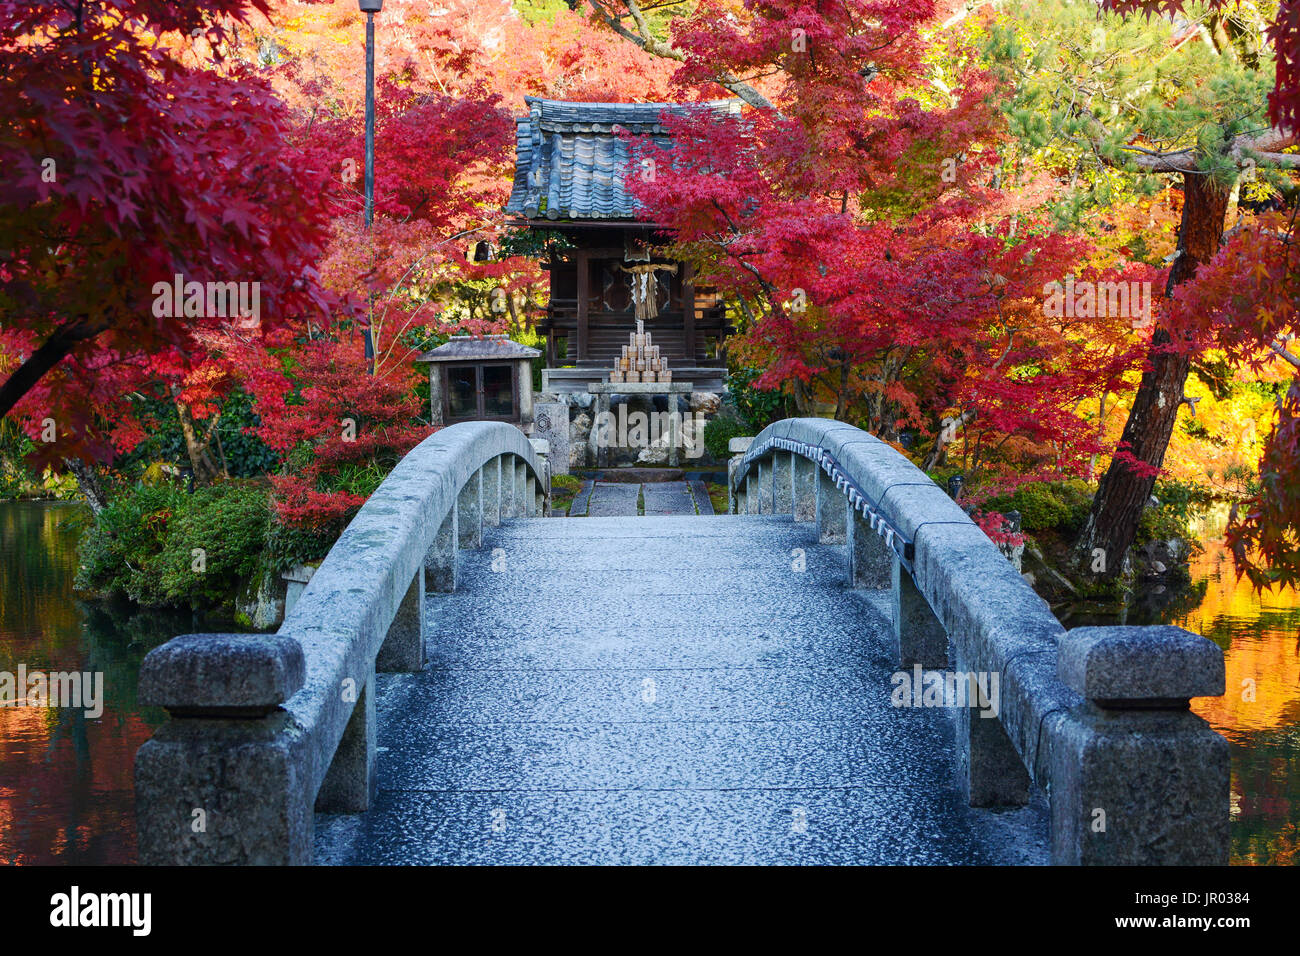 Bridge to a pond island with a small Japanese prayer shrine and red fall maple trees Stock Photo